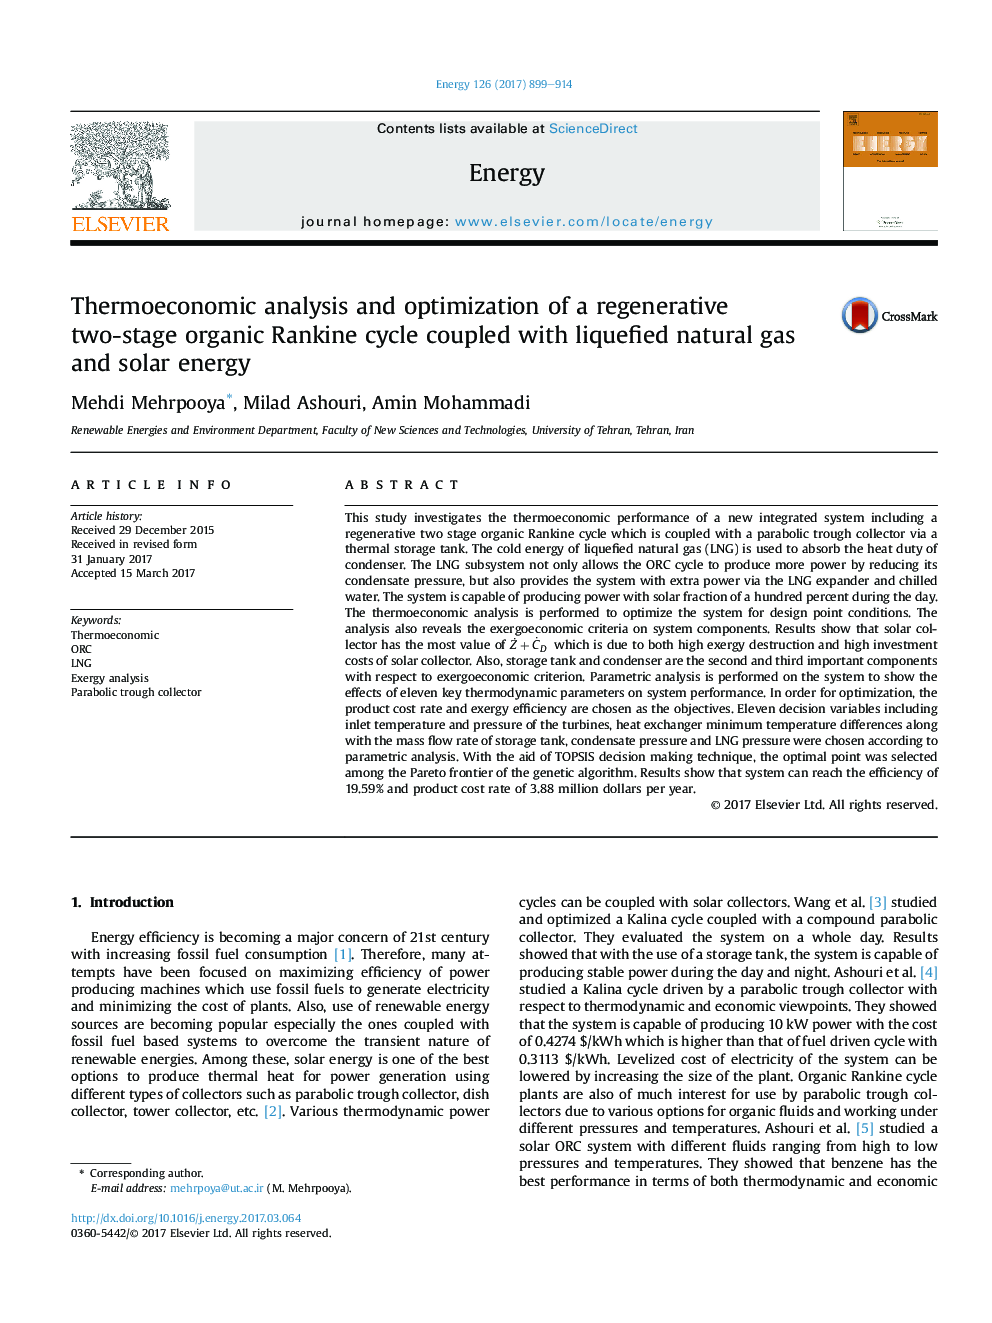 Thermoeconomic analysis and optimization of a regenerative two-stage organic Rankine cycle coupled with liquefied natural gas and solar energy